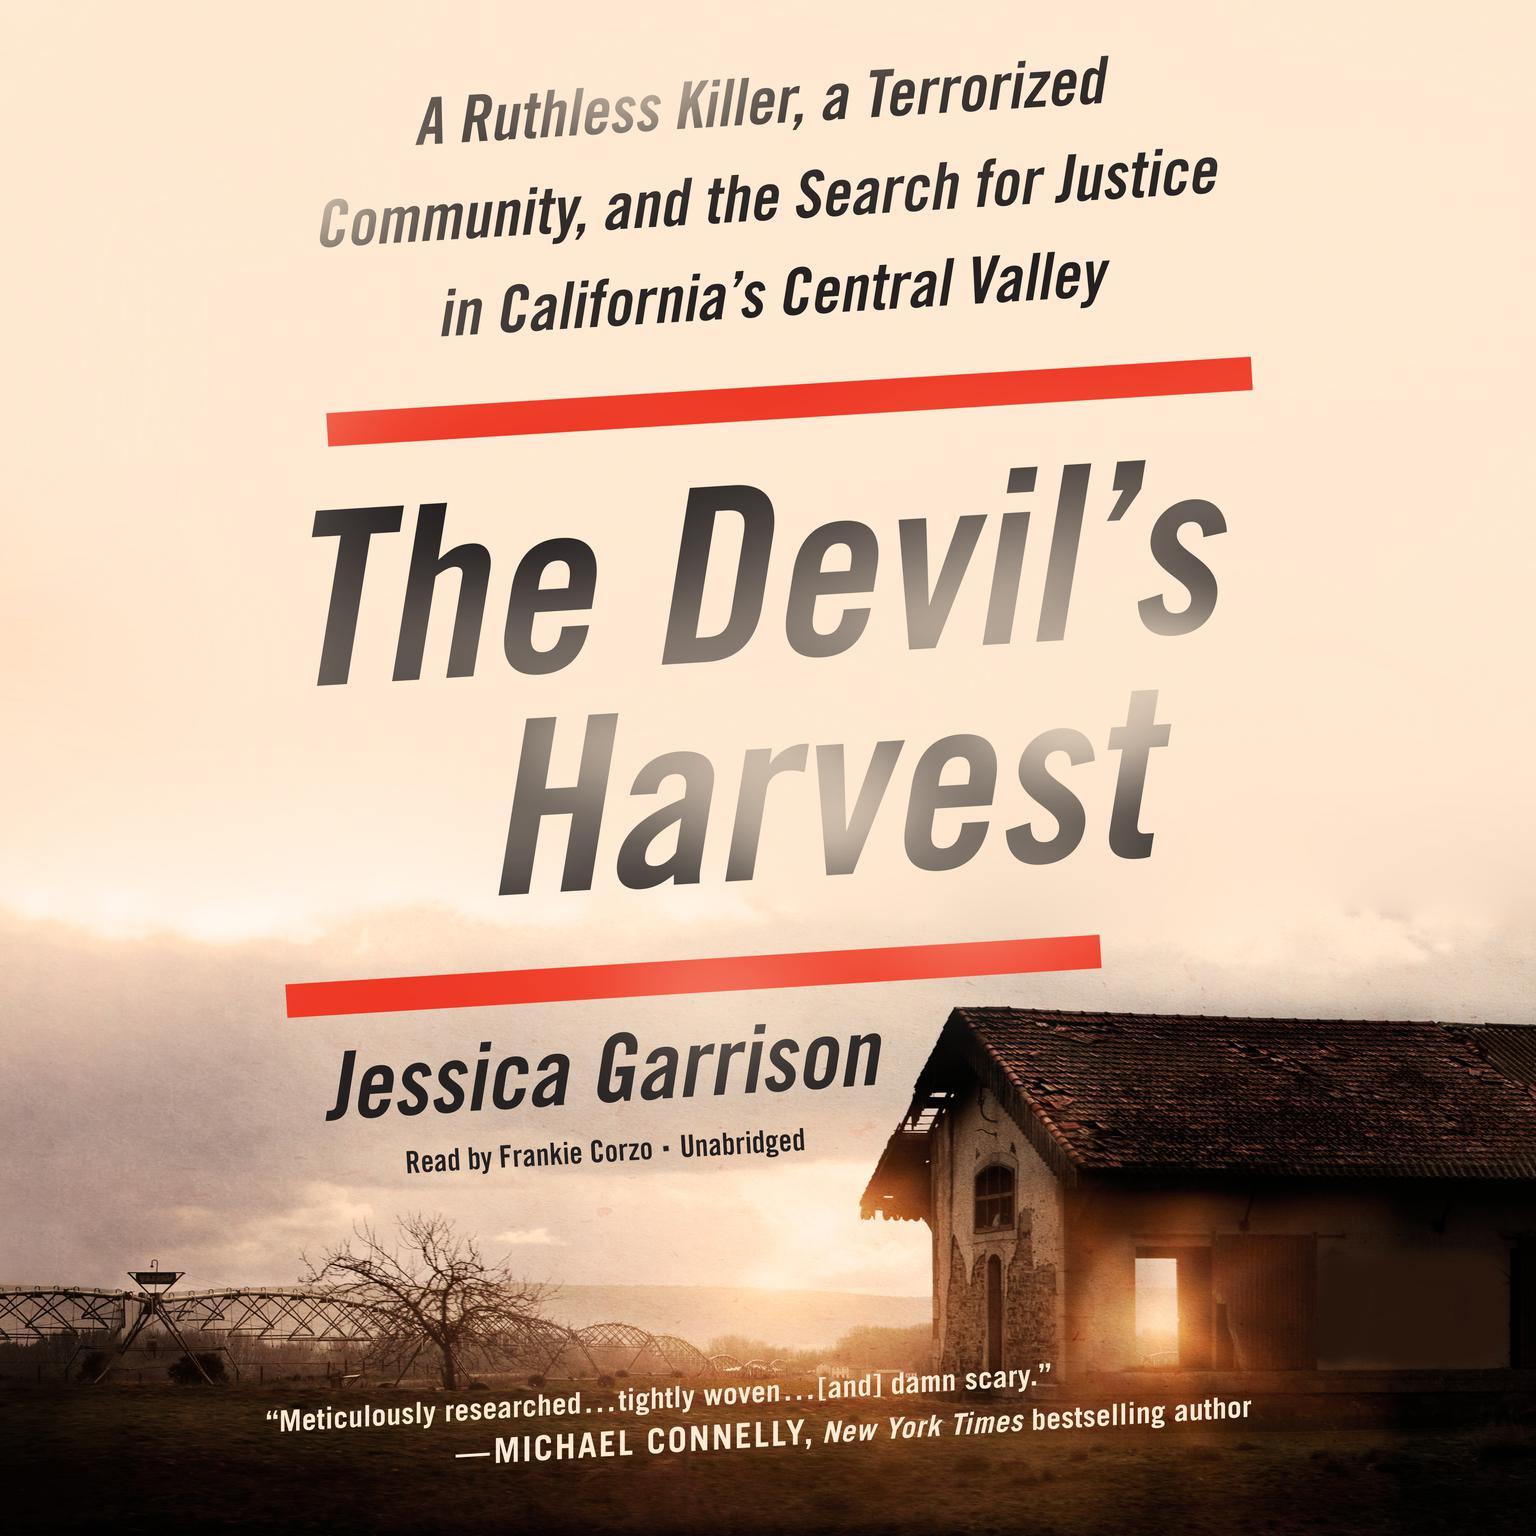 The Devils Harvest: A Ruthless Killer, a Terrorized Community, and the Search for Justice in Californias Central Valley Audiobook, by Jessica Garrison